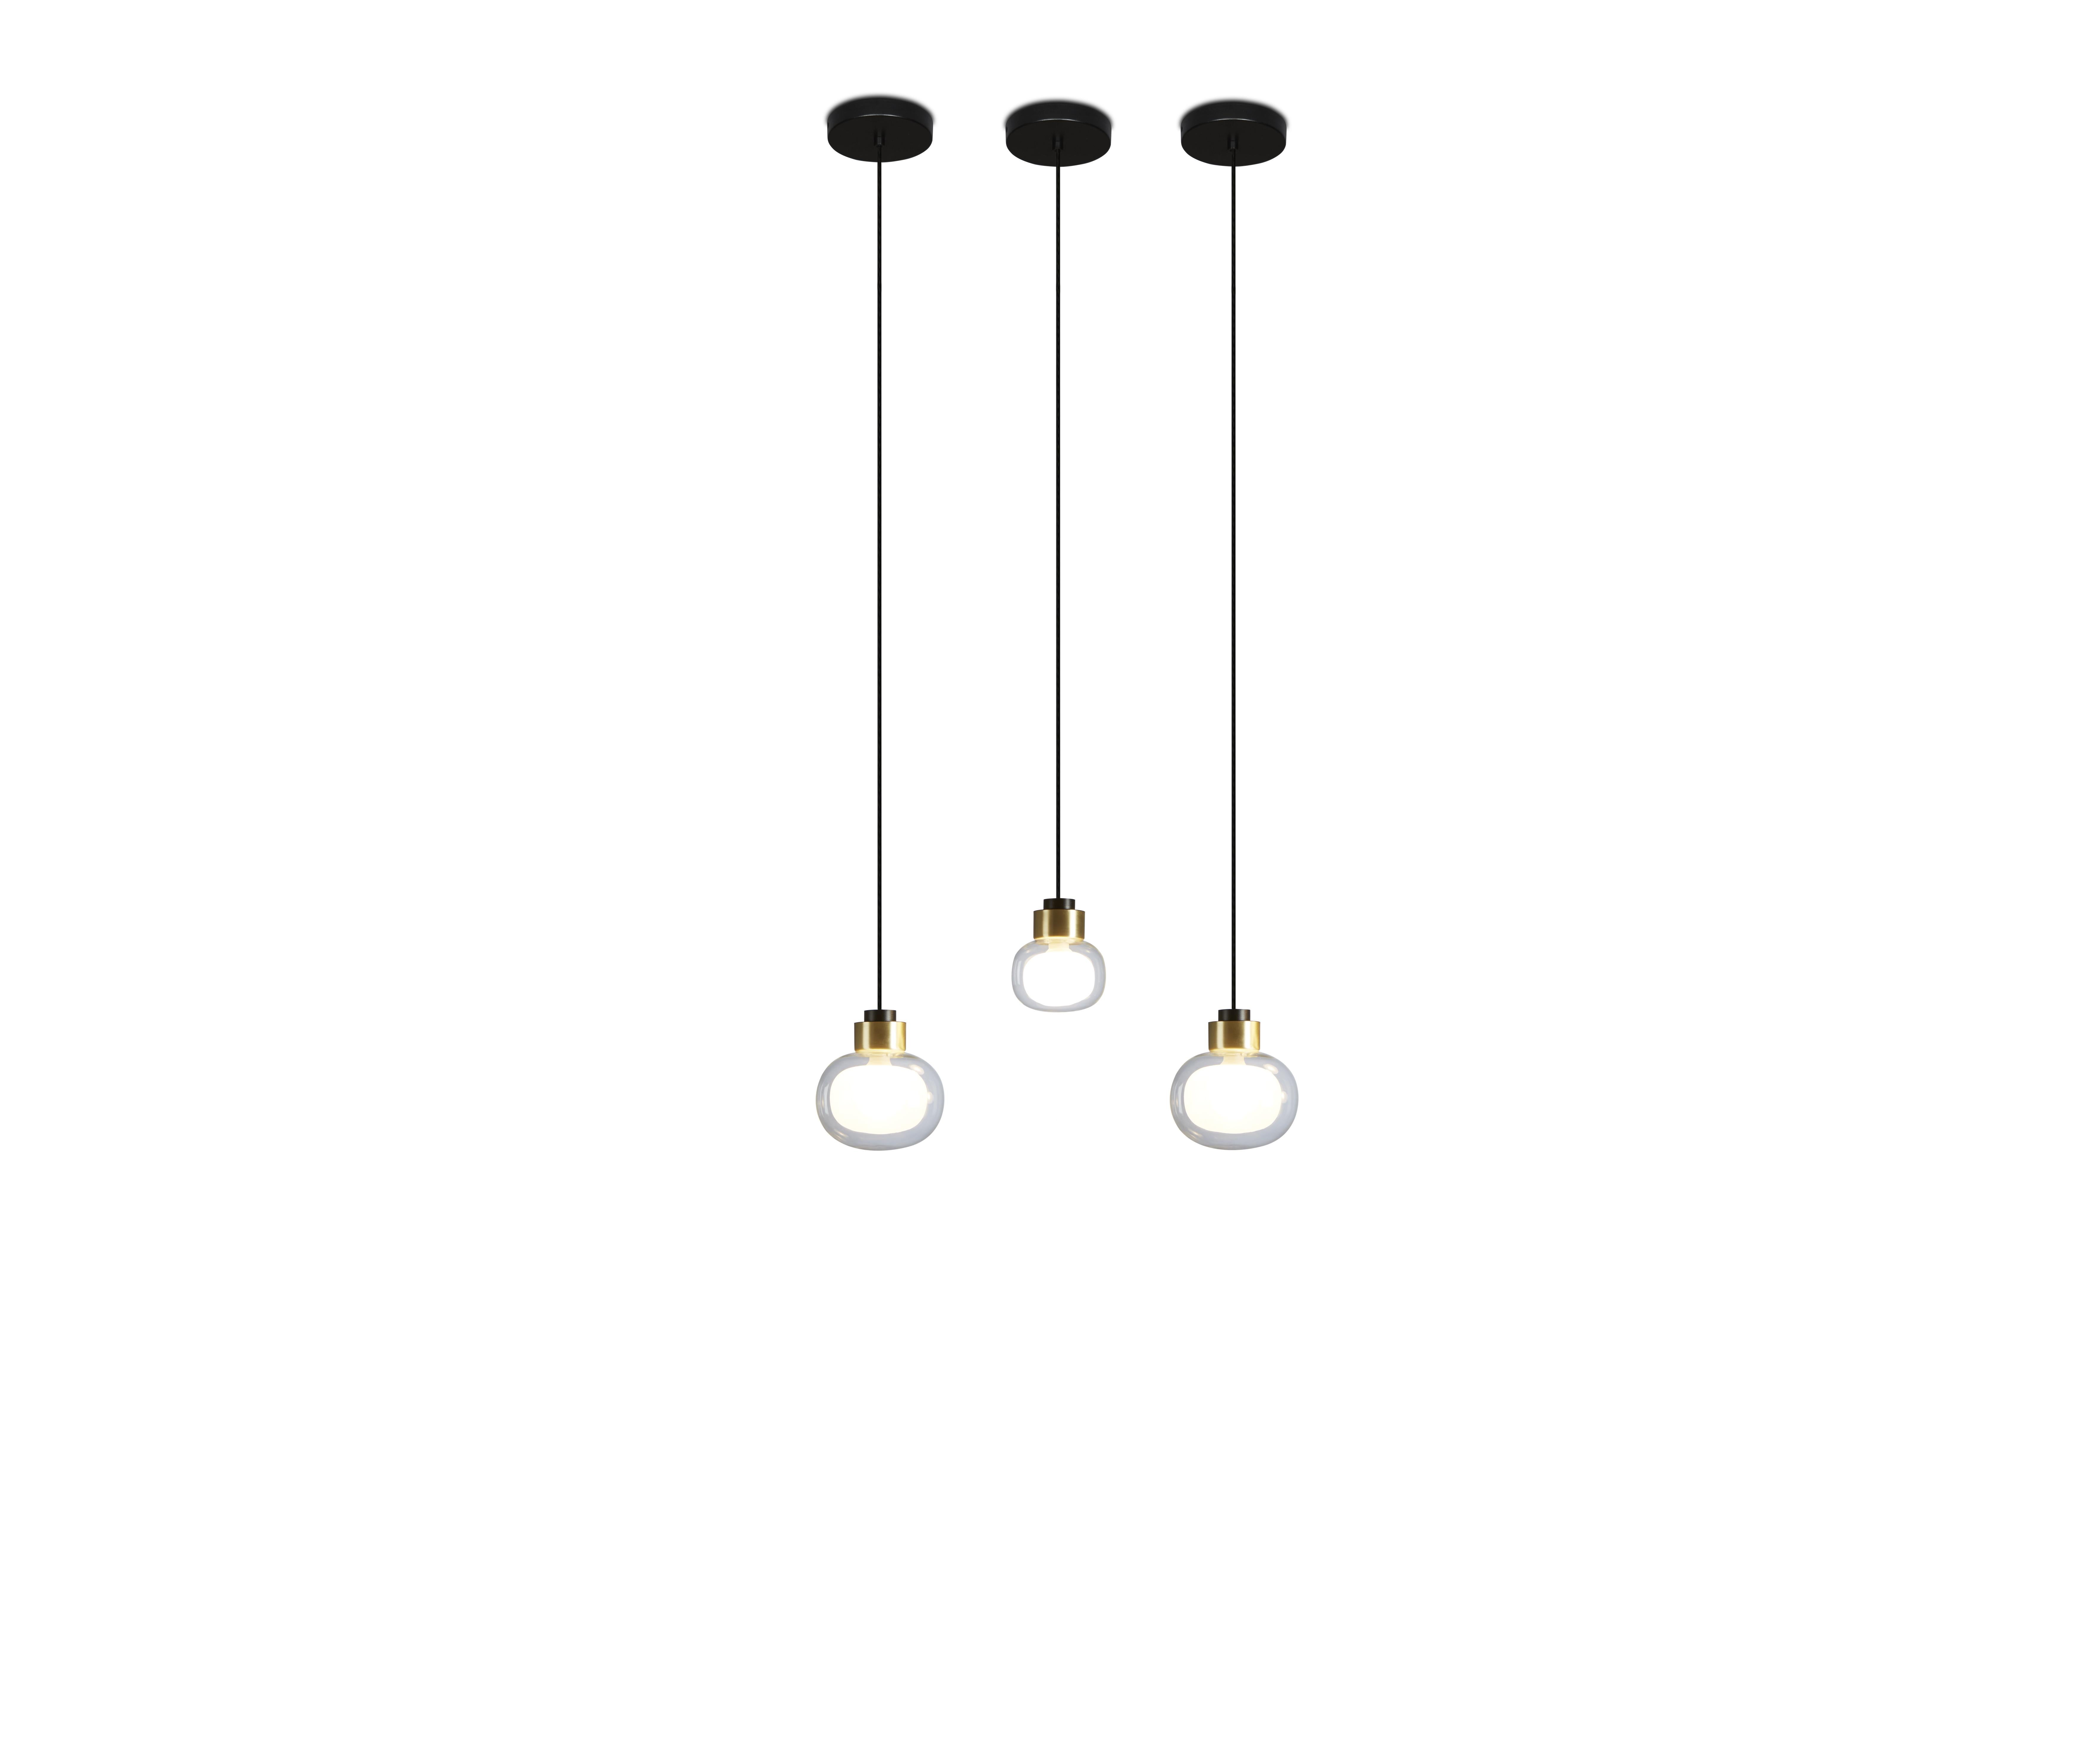 Set of 3 Pendant Lamps 'Nabila 552.21' by Tooy, Brushed Brass, Clear Glass For Sale 4